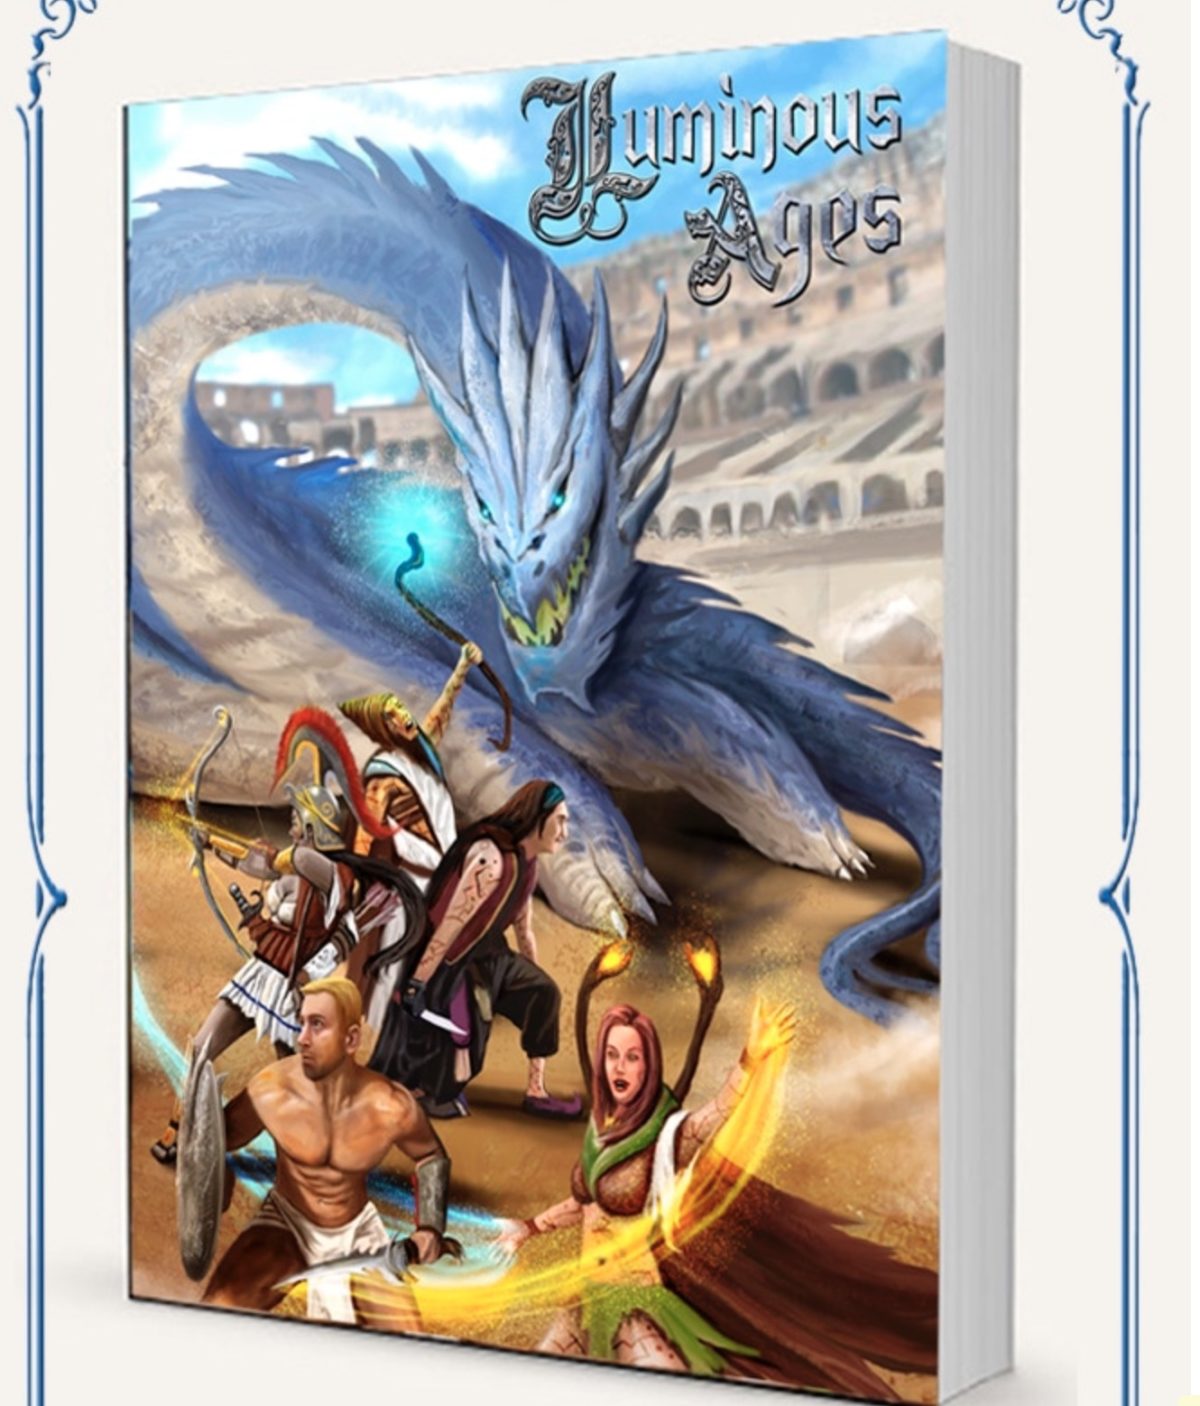 Luminous Ages Volume 1: Dragons, Monsters & Surreal Fantasy  Superbly painted epic adventure with wizards & creatures from many myths & cultures fighting for nature. Discover a new form of magic.  .  .